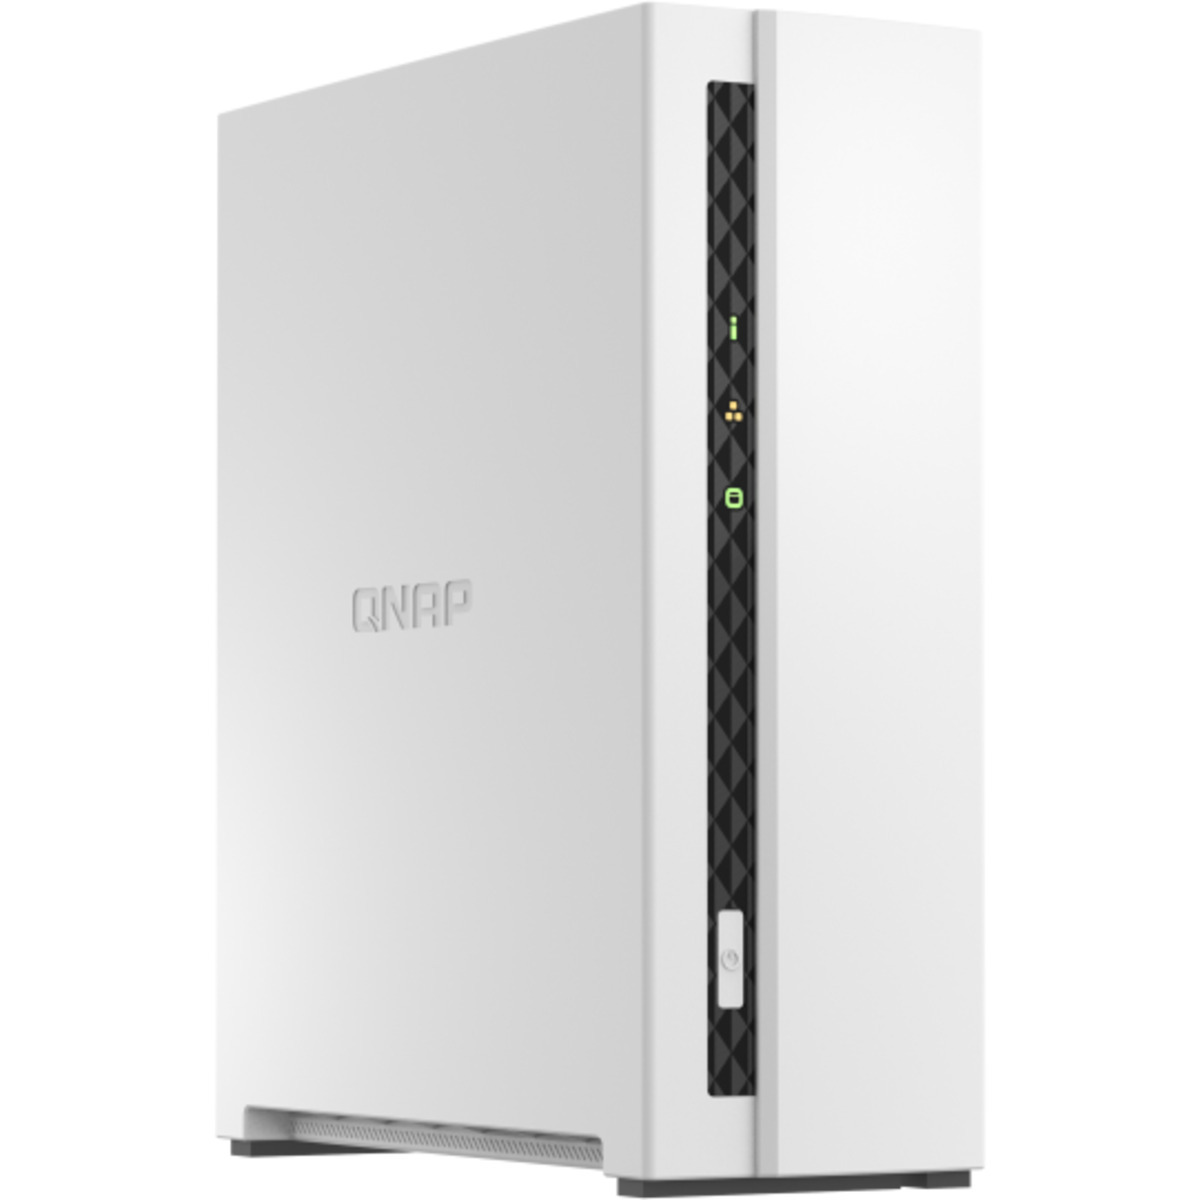 buy $259 QNAP TS-133 4tb Desktop NAS - Network Attached Storage Device 1x4000gb Toshiba MN Series MN08ADA400E 3.5 7200rpm SATA 6Gb/s HDD NAS Class Drives Installed - Burn-In Tested - ON SALE - nas headquarters buy network attached storage server device das new raid-5 free shipping simply usa TS-133